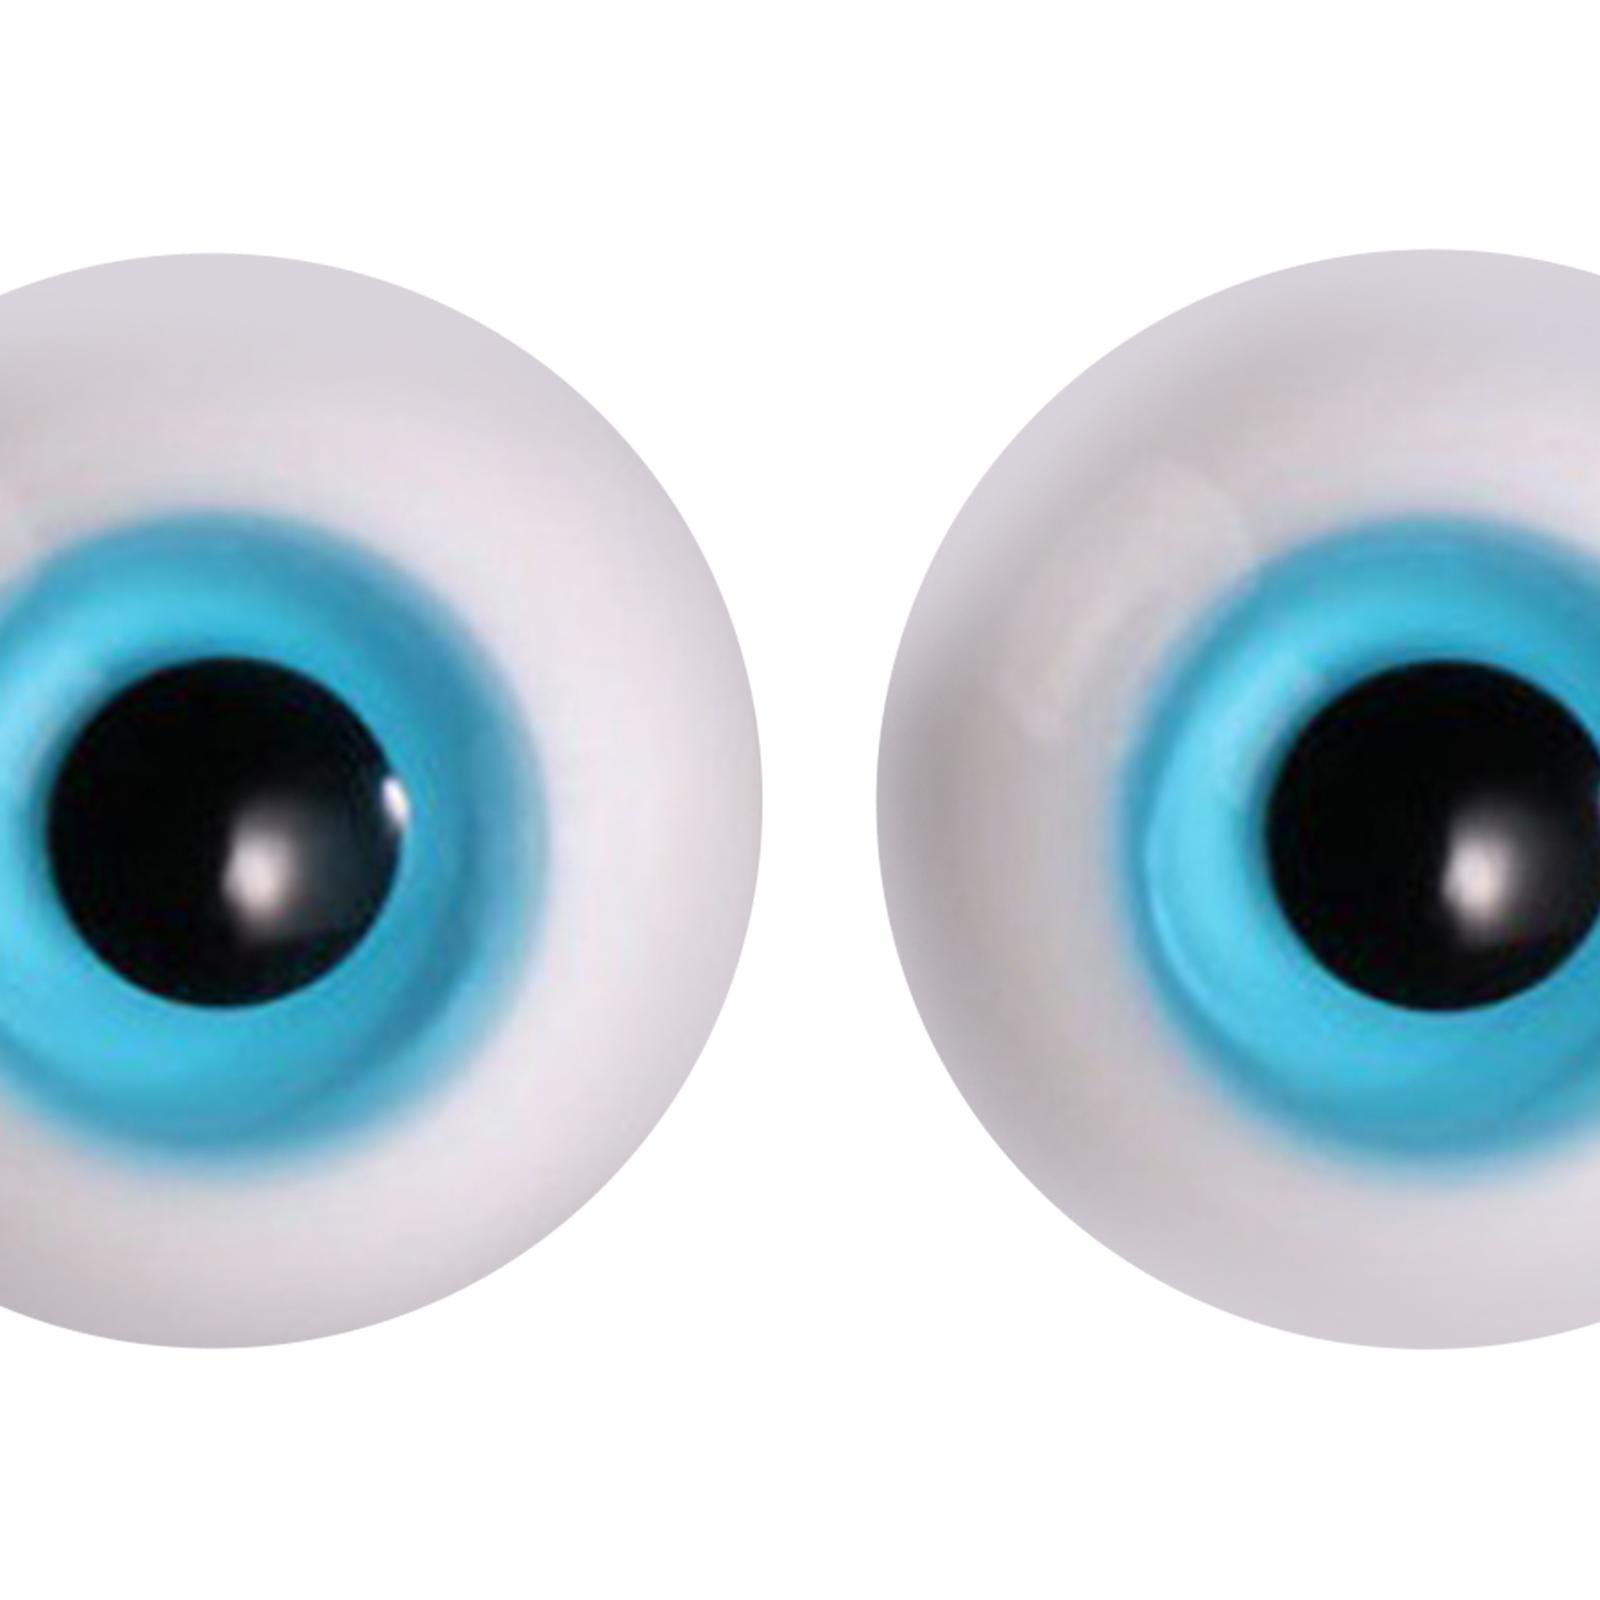 2x Realistic Doll Eyes, Wiggle Eyes (6 Mm) Accessories, Movable, Art  Eyeball for Doll Making Supplies DIY Stuffed Animals Sculpture , Pink Pink